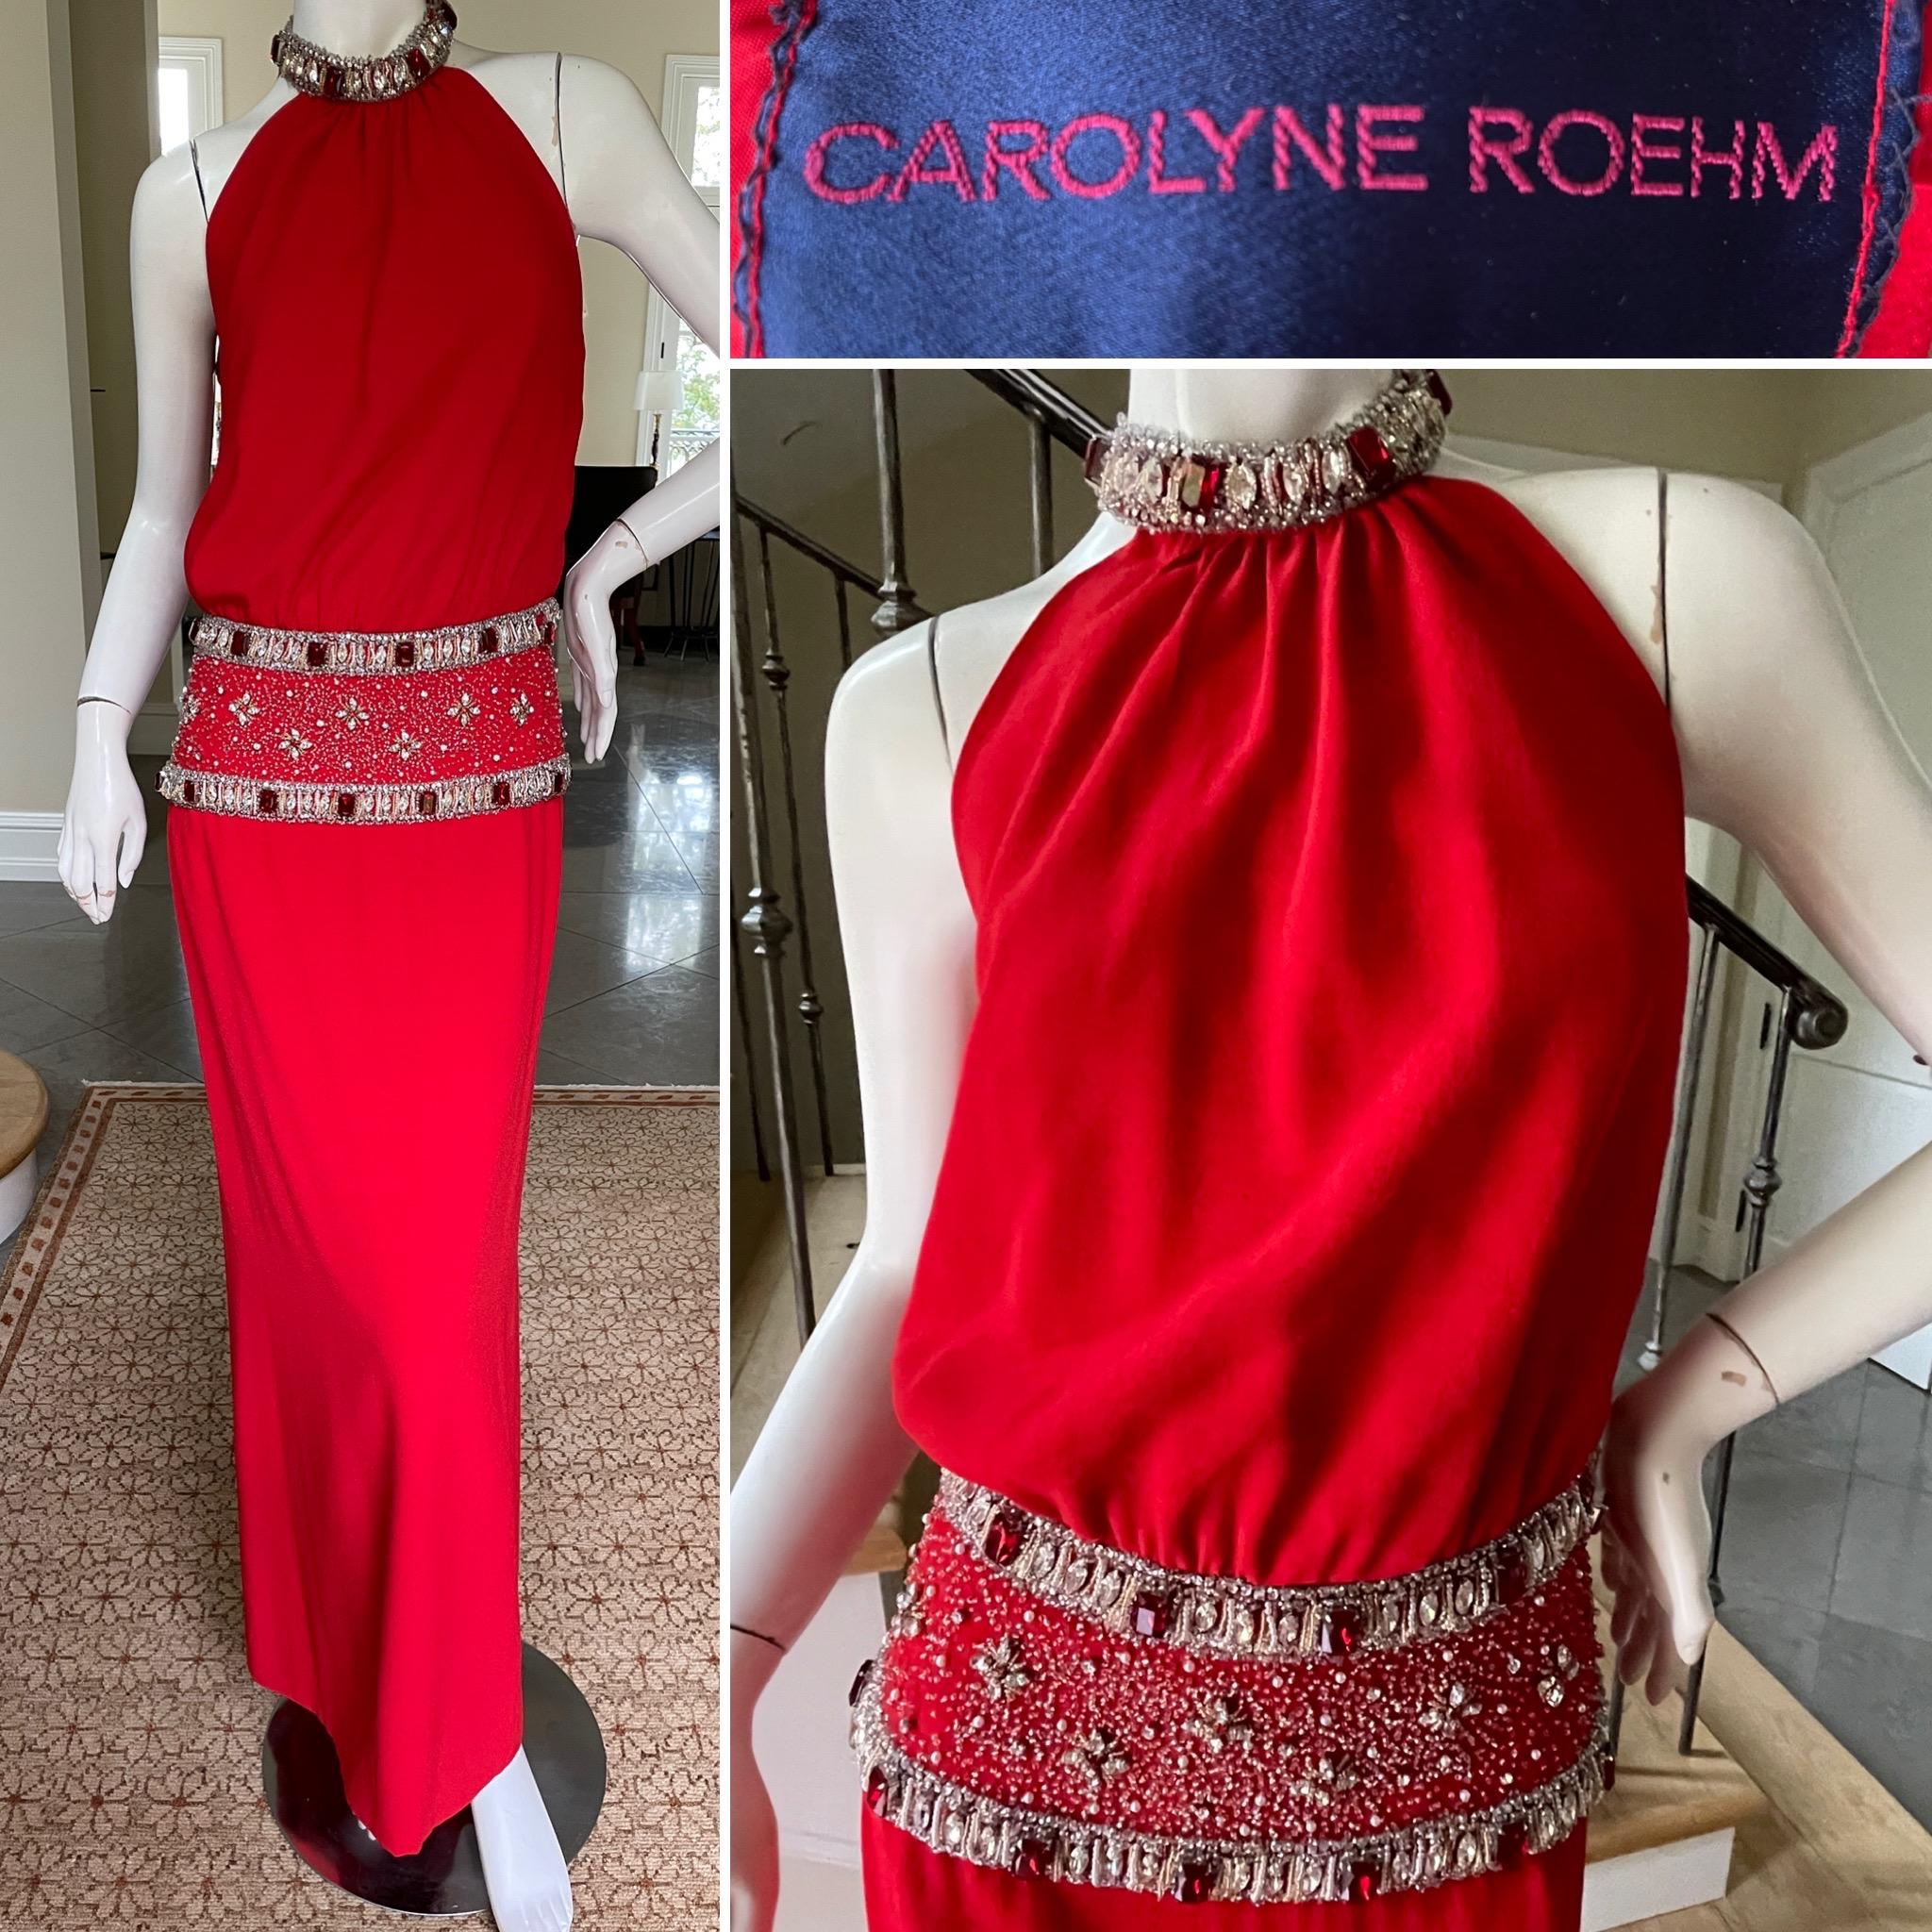 Carolyne Roehm Red Column Evening Dress with Jewel Embellished Waist and Collar 
So beautiful, much prettier in person.
This is exquisite.
Size 8 vintage, 6 today
 Bust 38